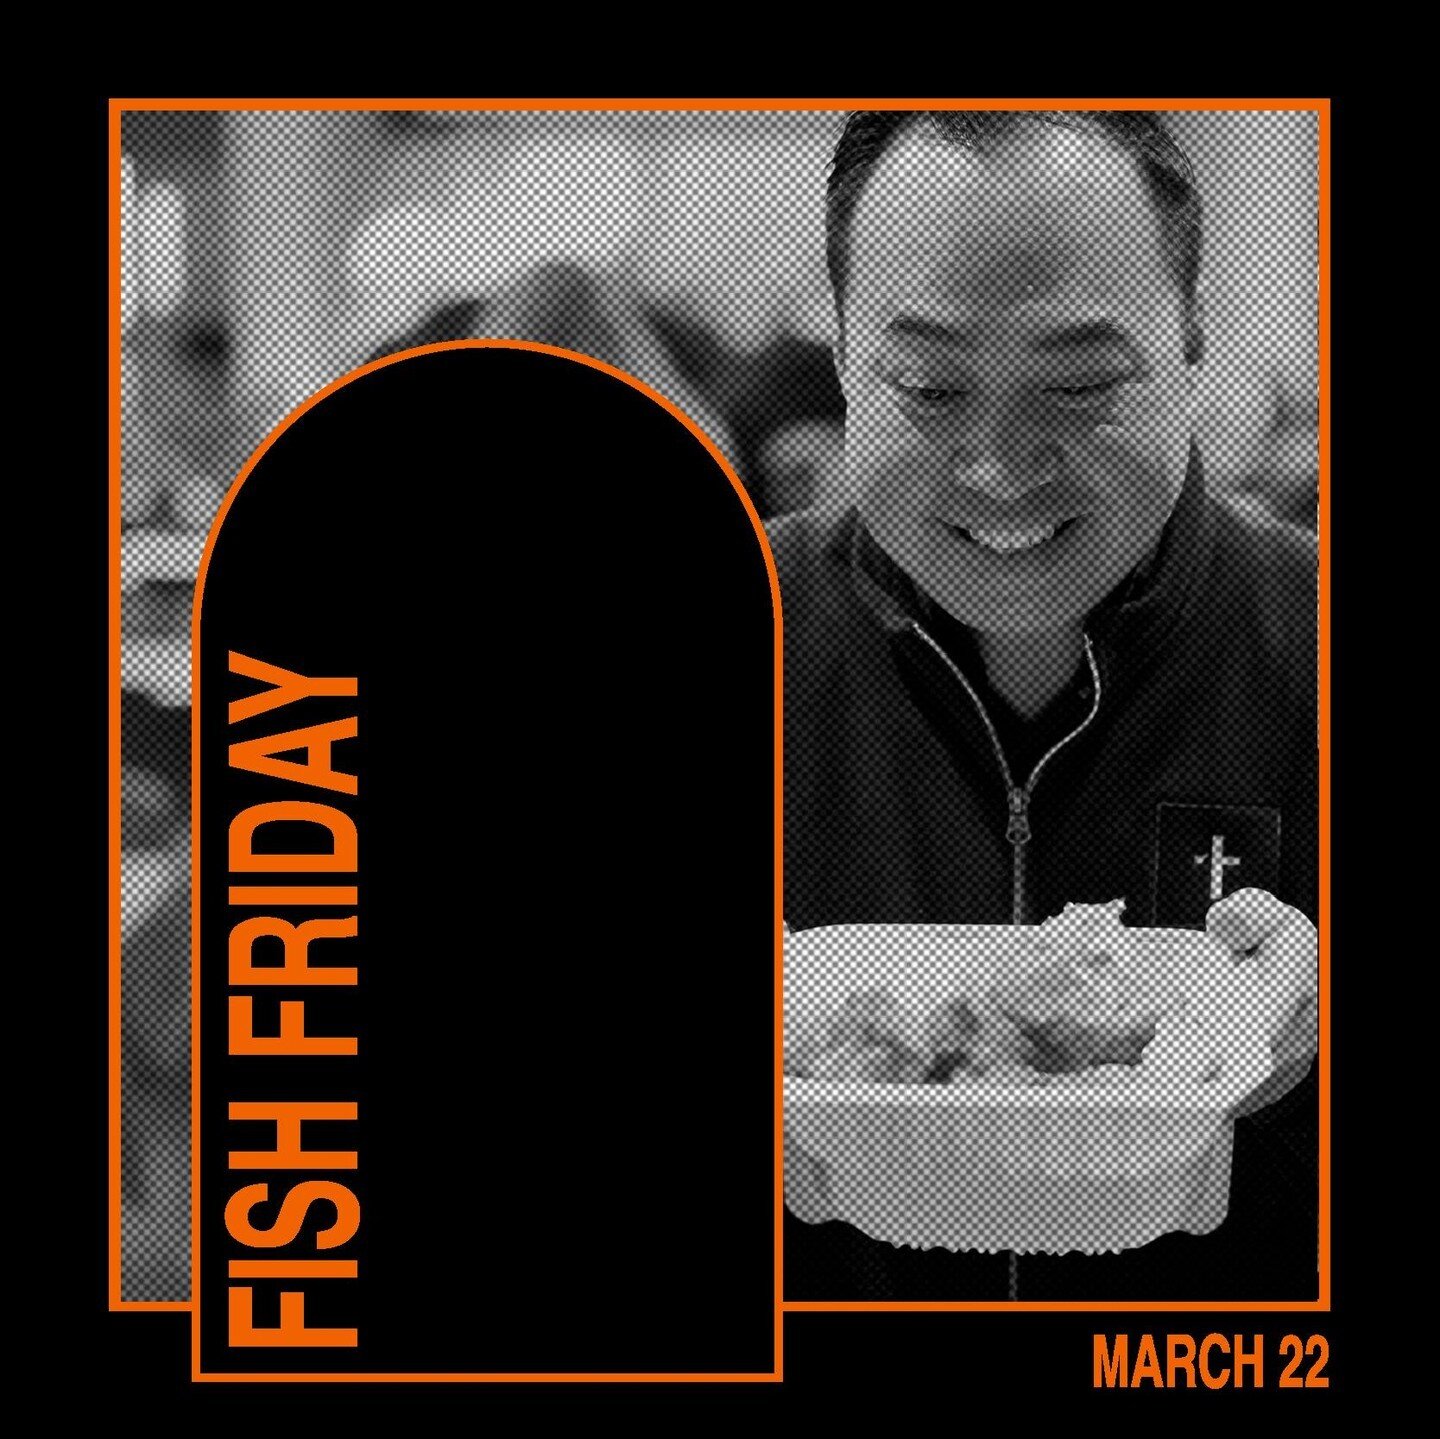 Join Fr. Duy and the Solano family as we enjoy one last Fish Friday, THIS Friday from 5-6:30 PM! 🐟️ Then, we will end the night with Stations in our church at 7 PM.